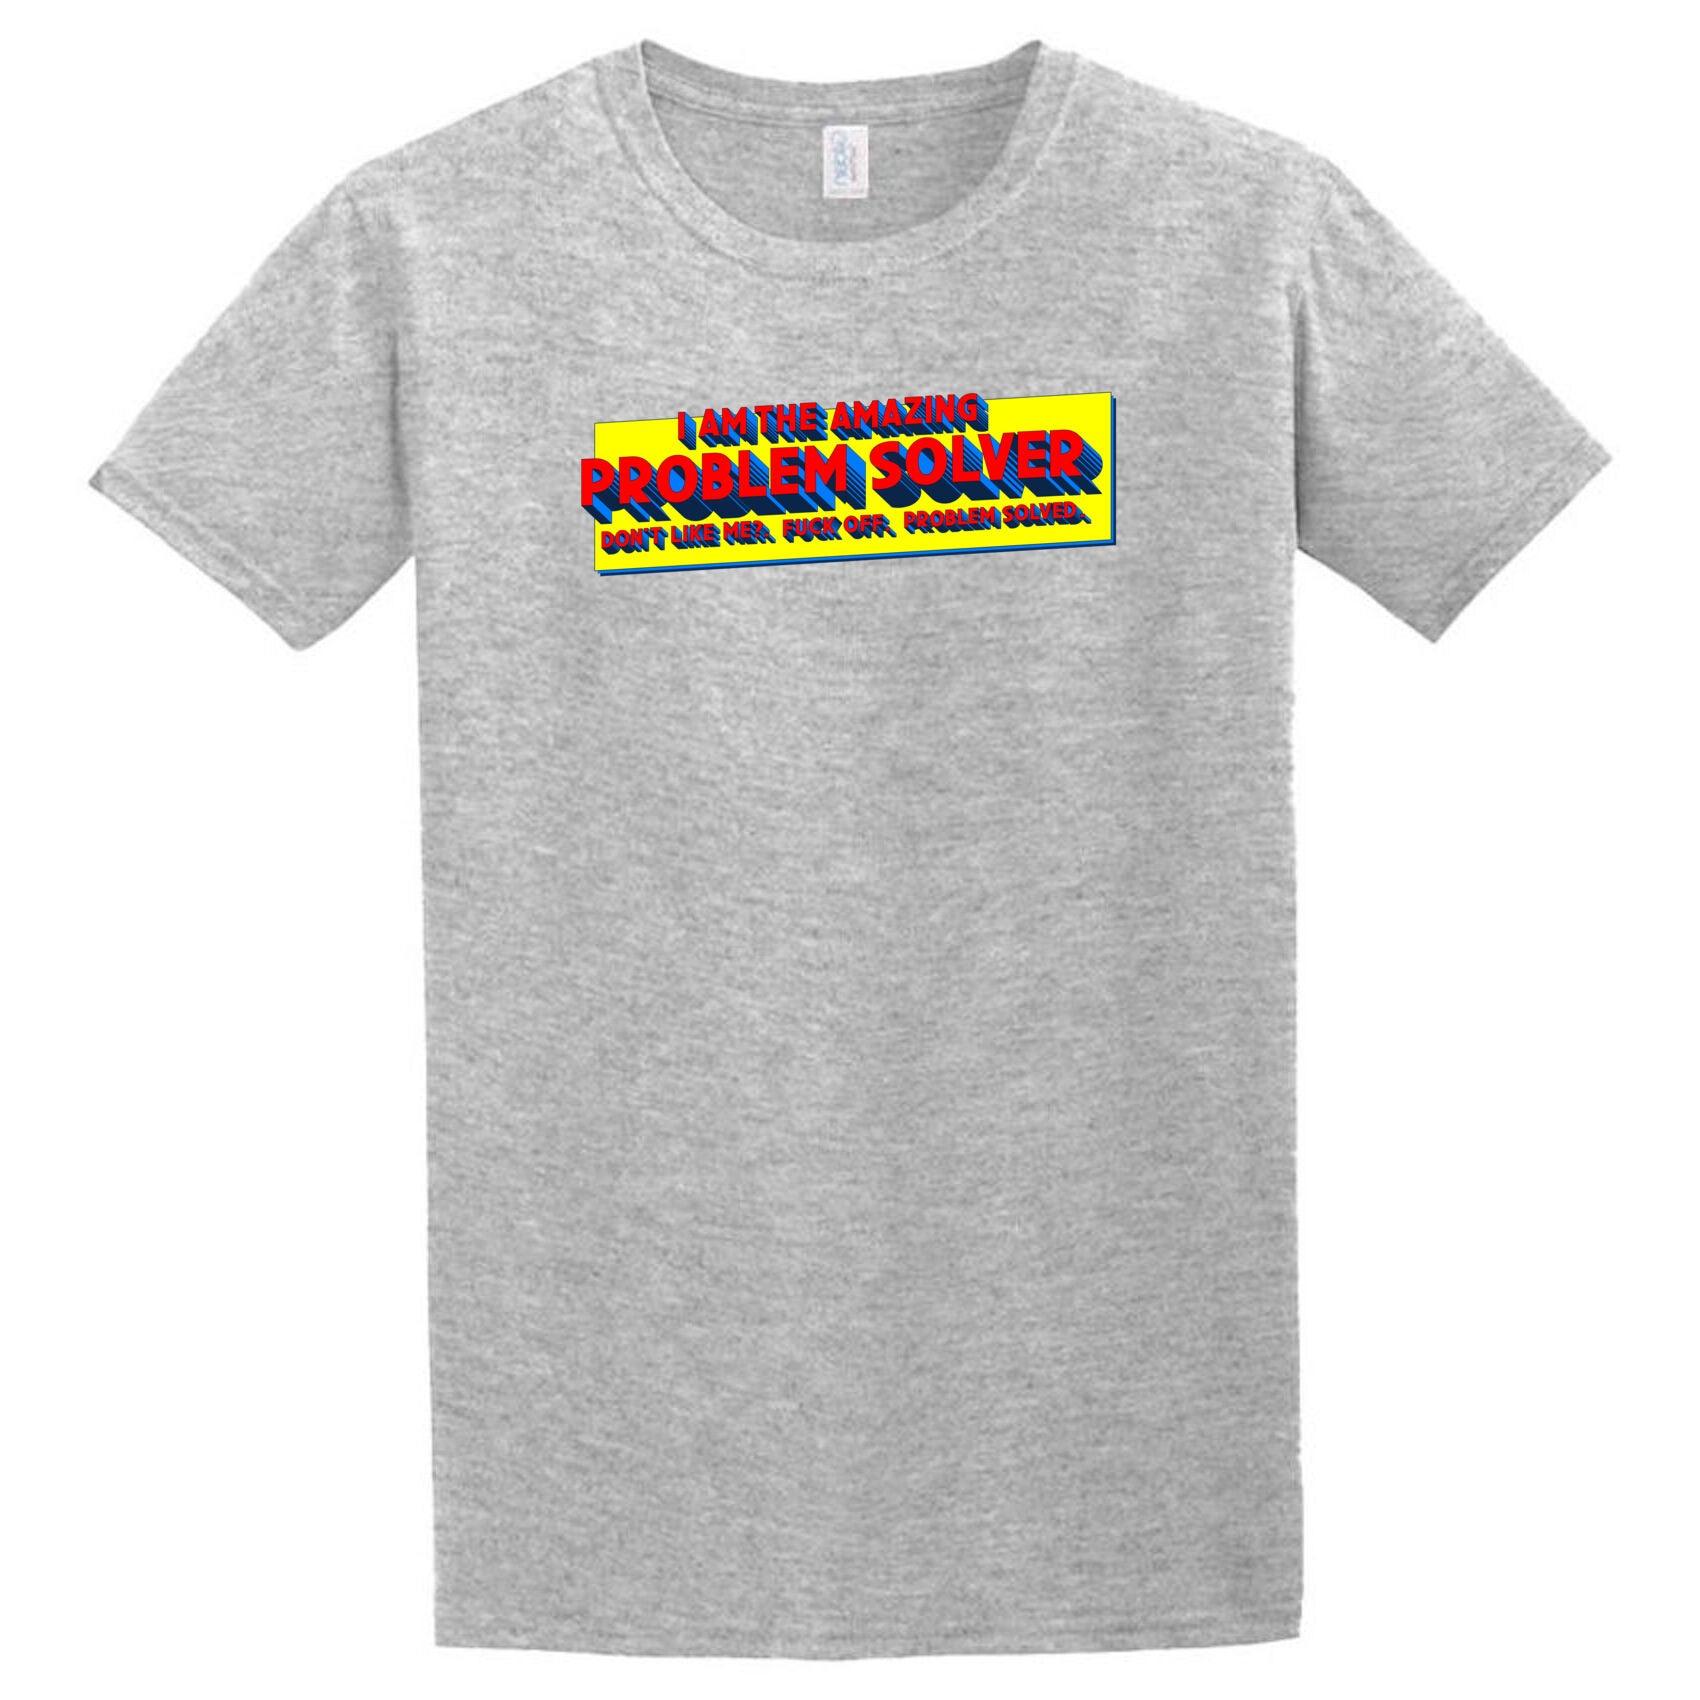 A Problem Solver T-Shirt by Twisted Gifts with a yellow, blue, and red logo.